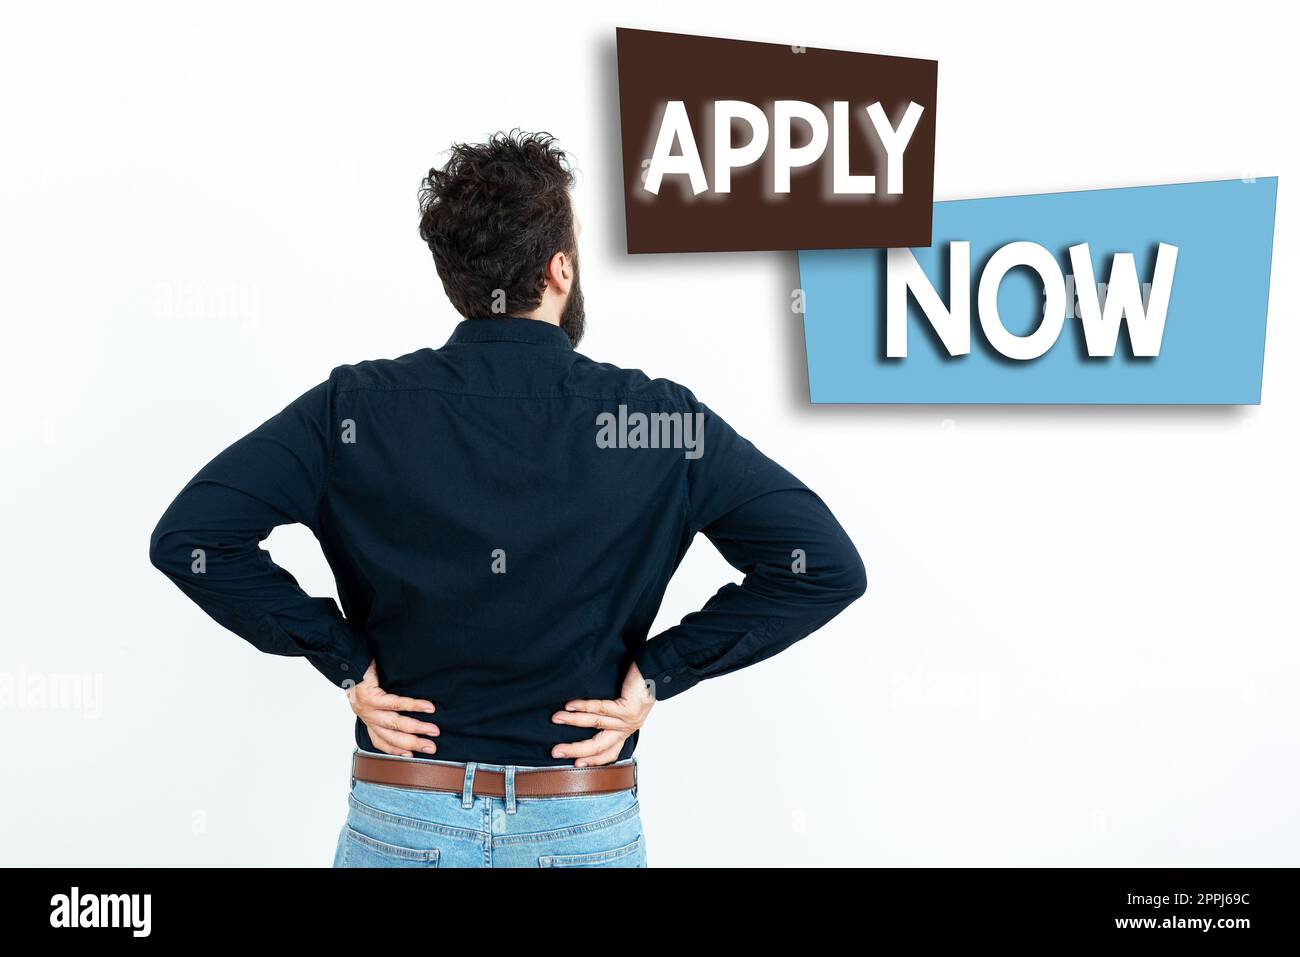 https://c8.alamy.com/comp/2PPJ69C/sign-displaying-apply-now-business-concept-an-act-of-a-person-to-acquire-the-job-related-to-the-profession-2PPJ69C.jpg